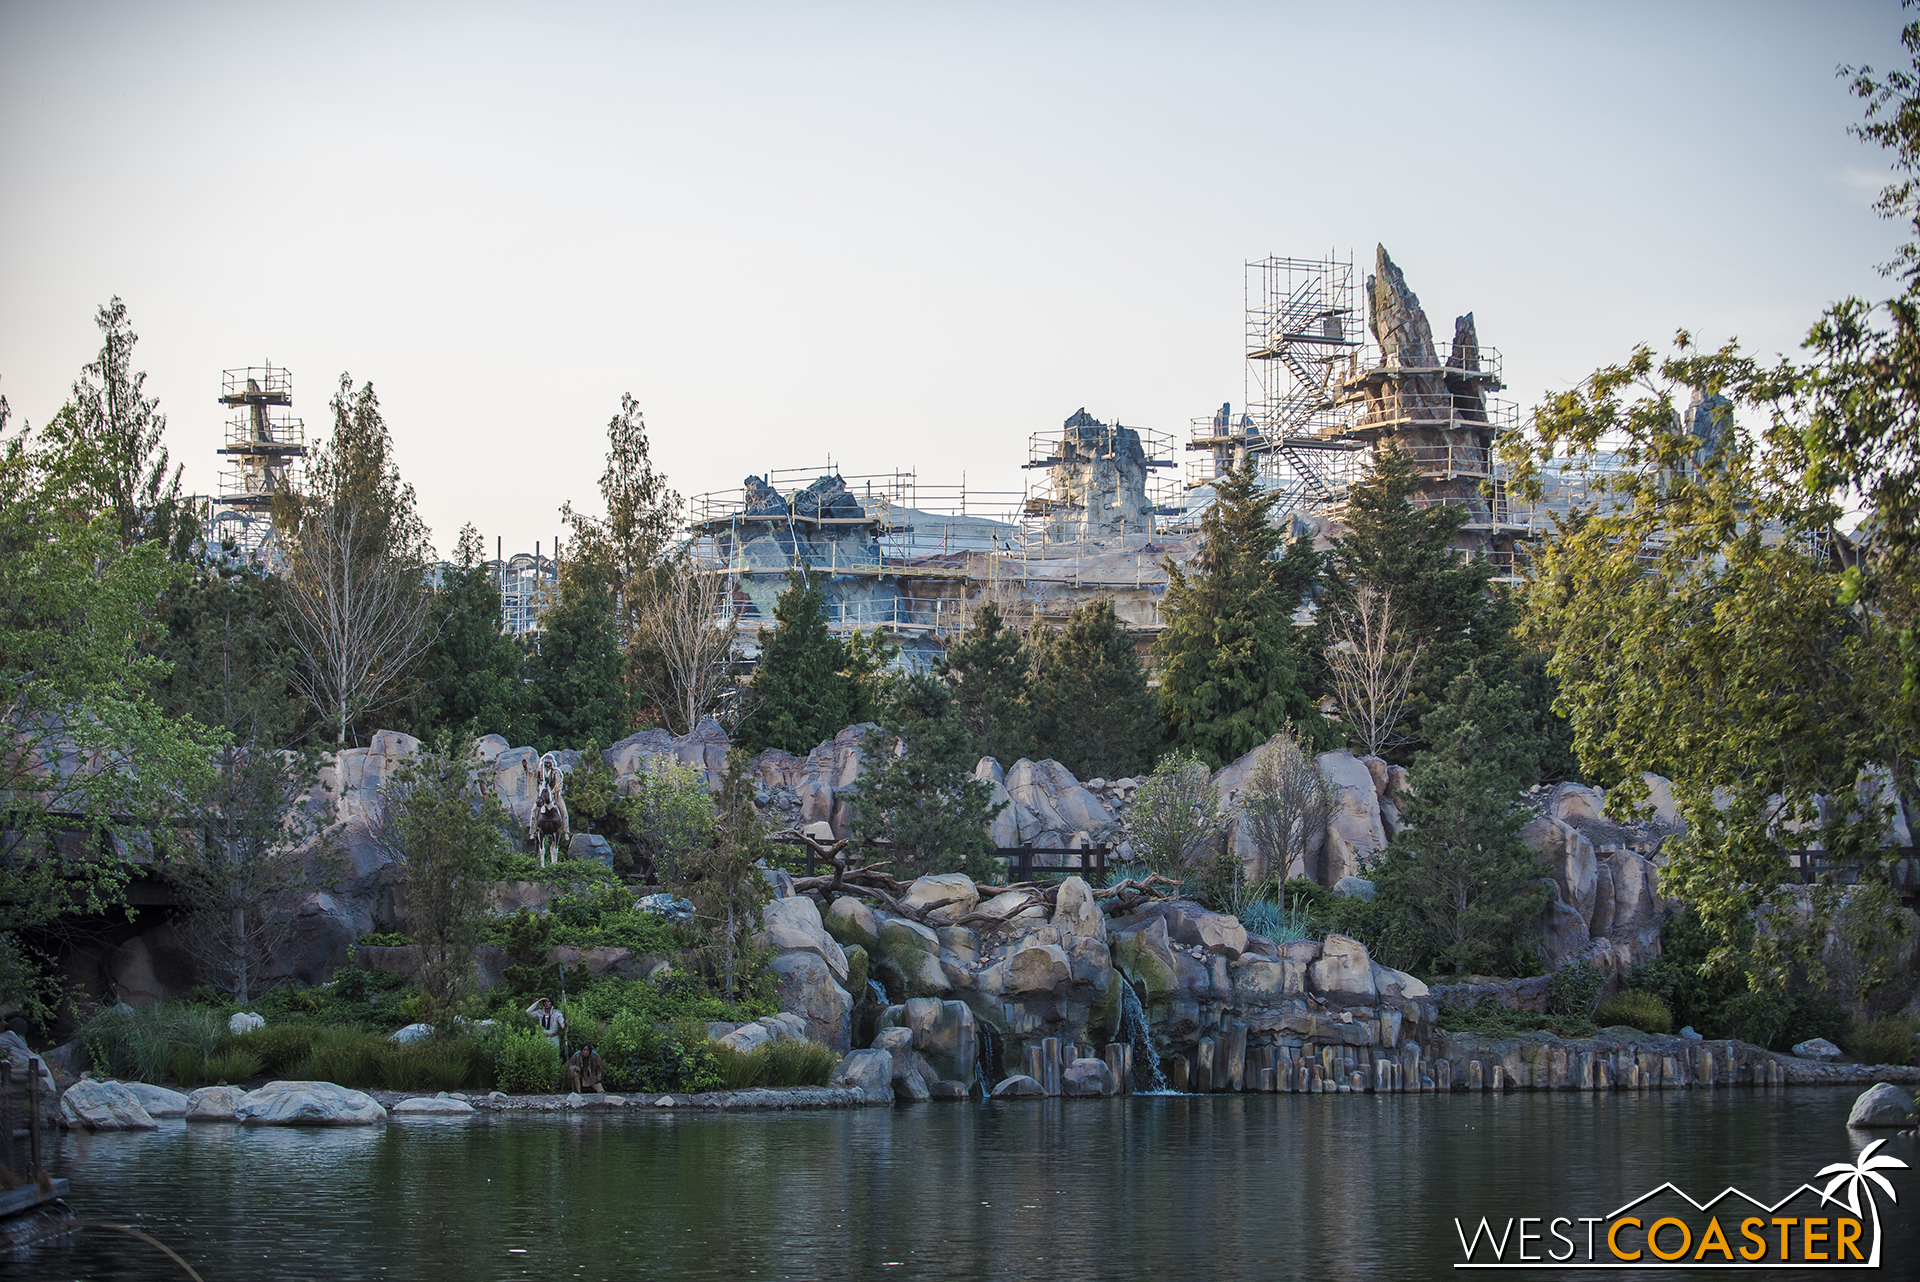  And on the Rivers of America side, they’re really starting to get prominent! 